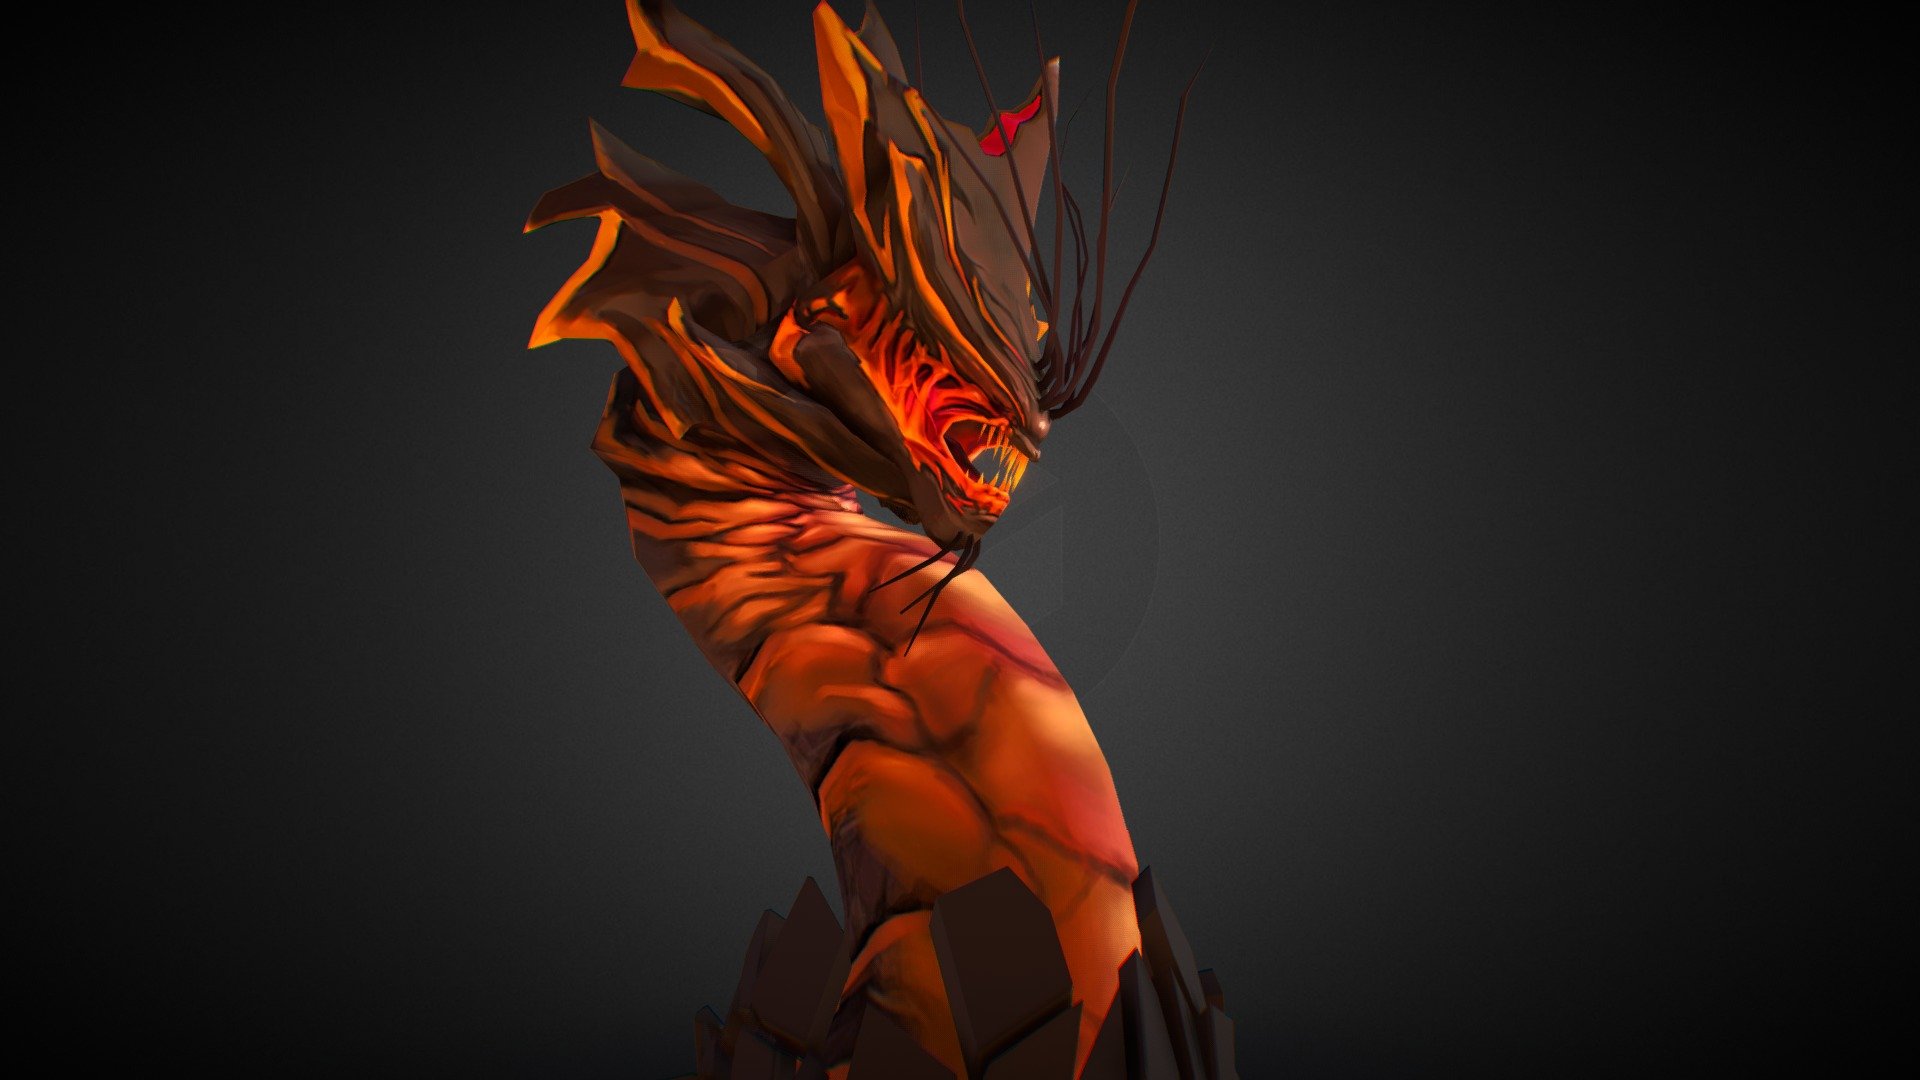 Handpainted lowpoly for mobile game. Animation by Andrey Zhukov - Sand worm - 3D model by Zunio (@lubiezunia) 3d model